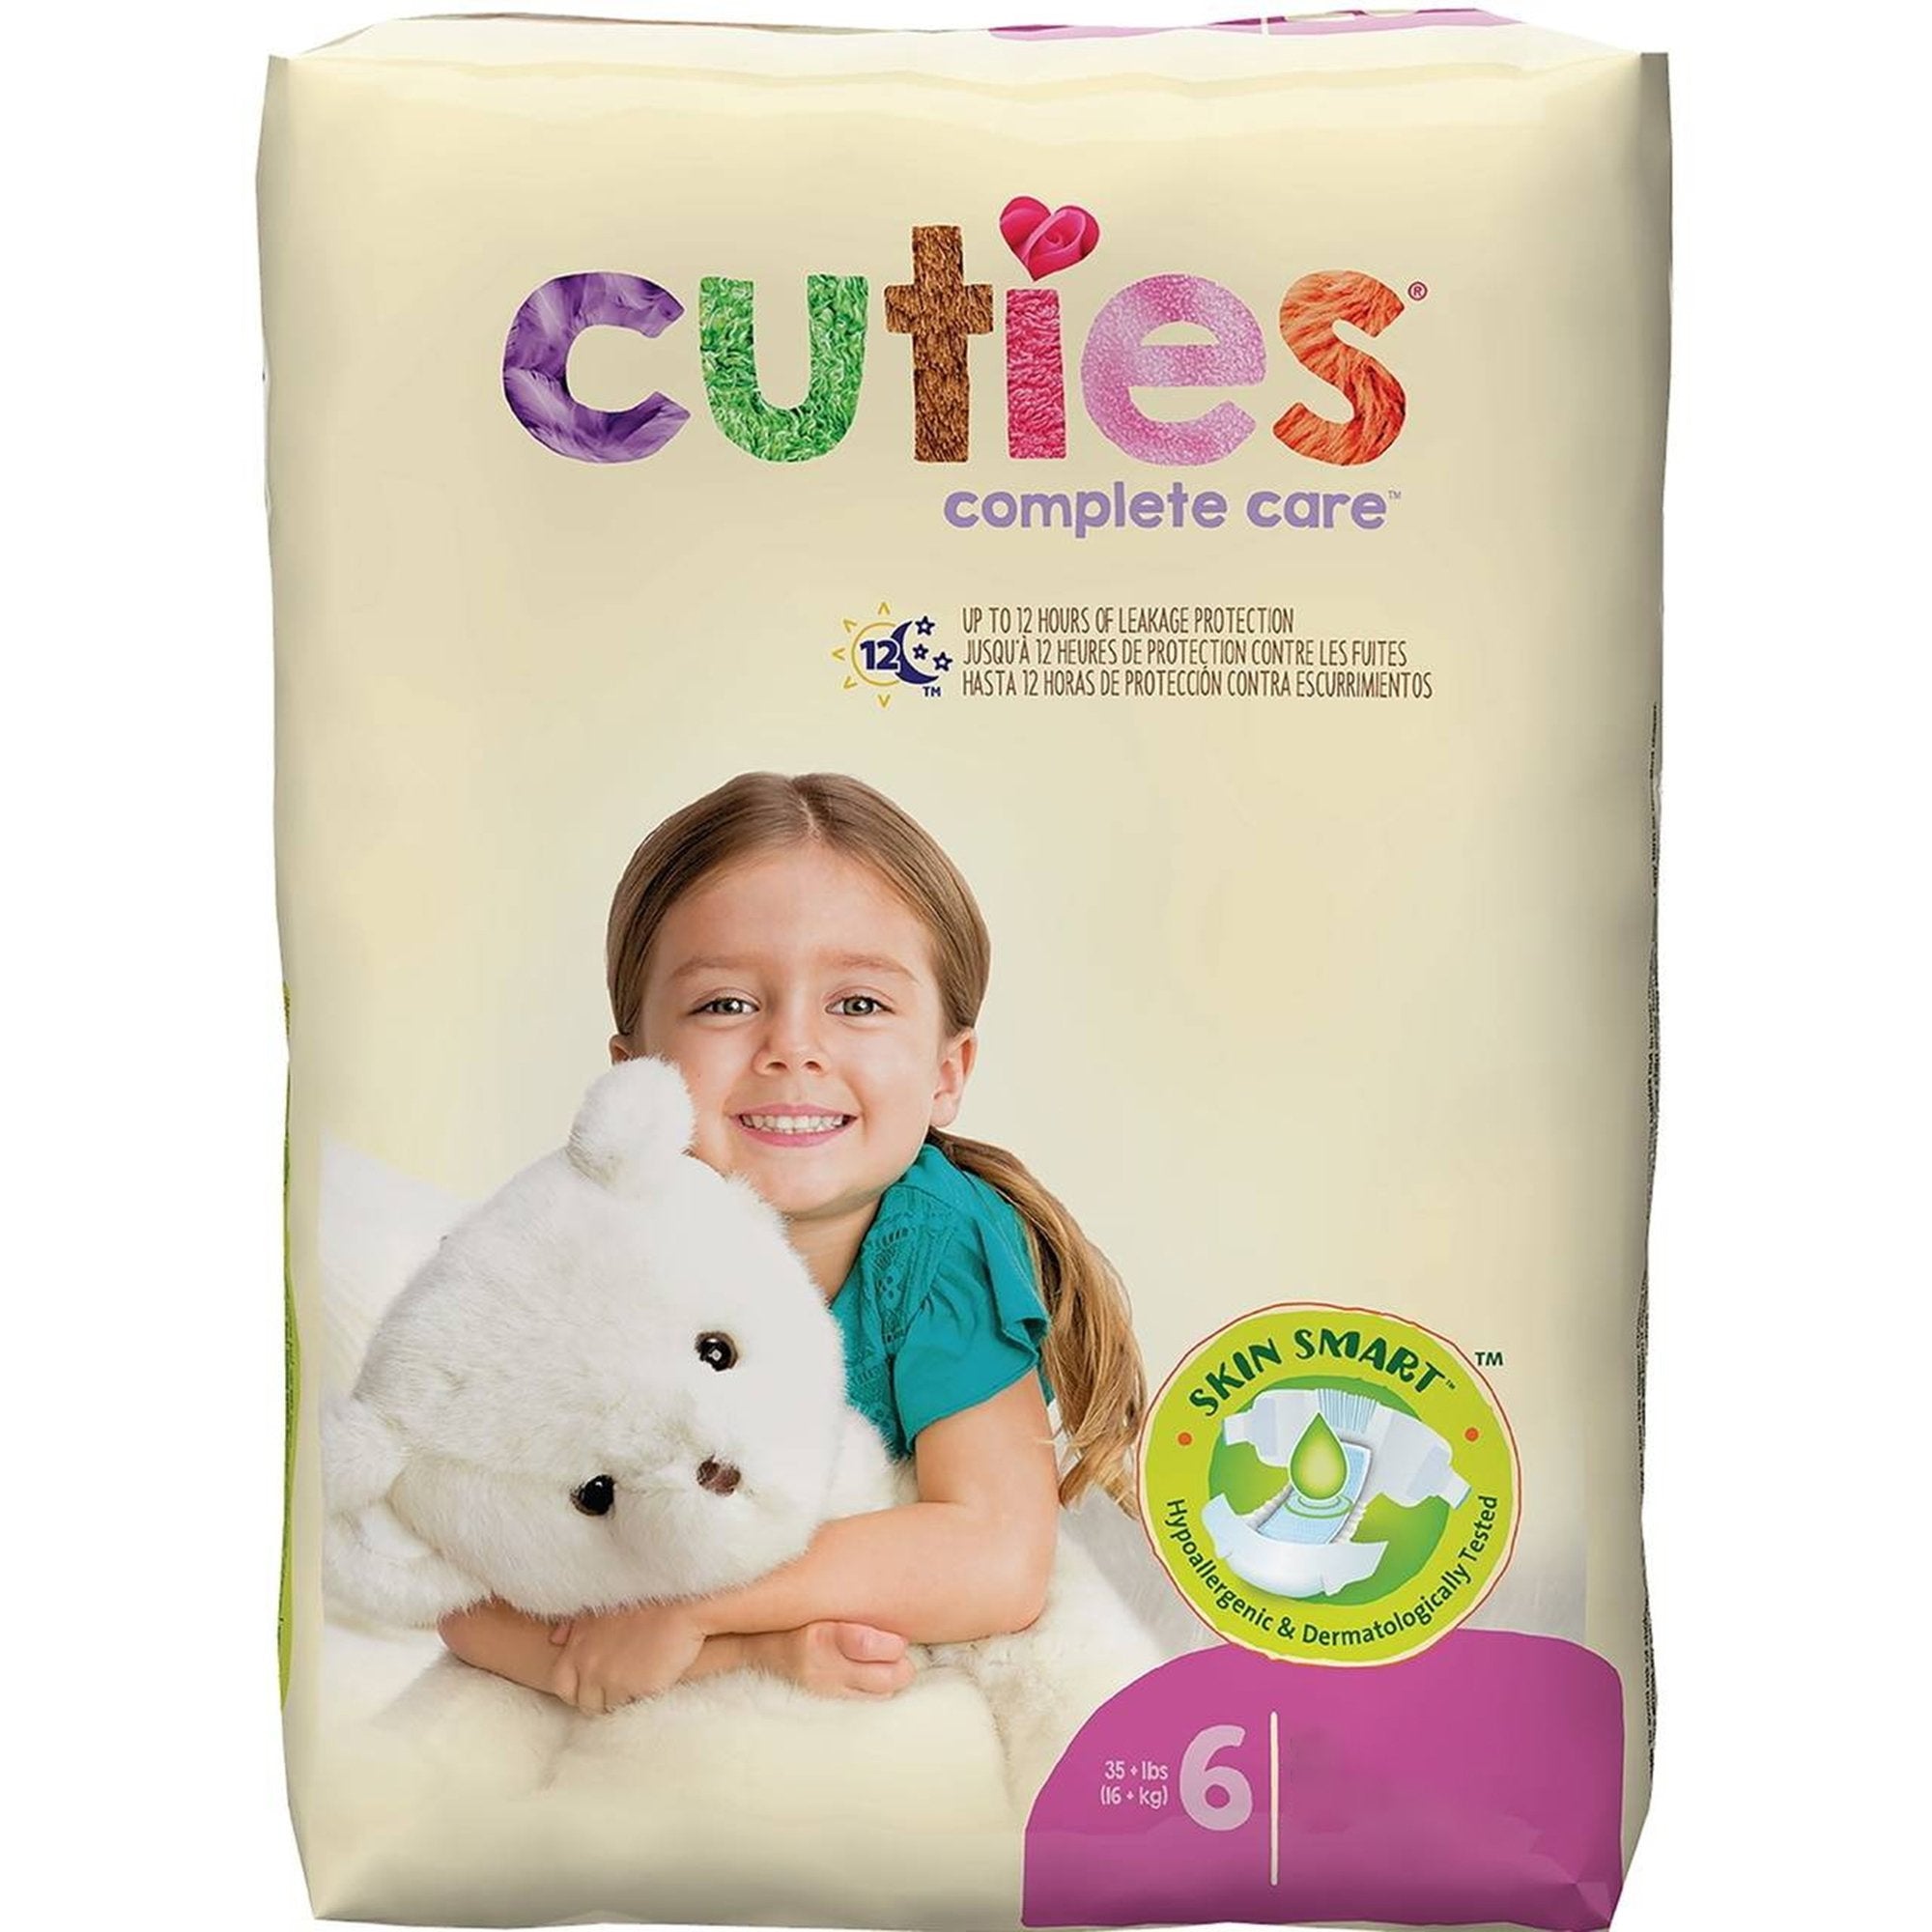 Cuties Complete Care Diapers, Size 6